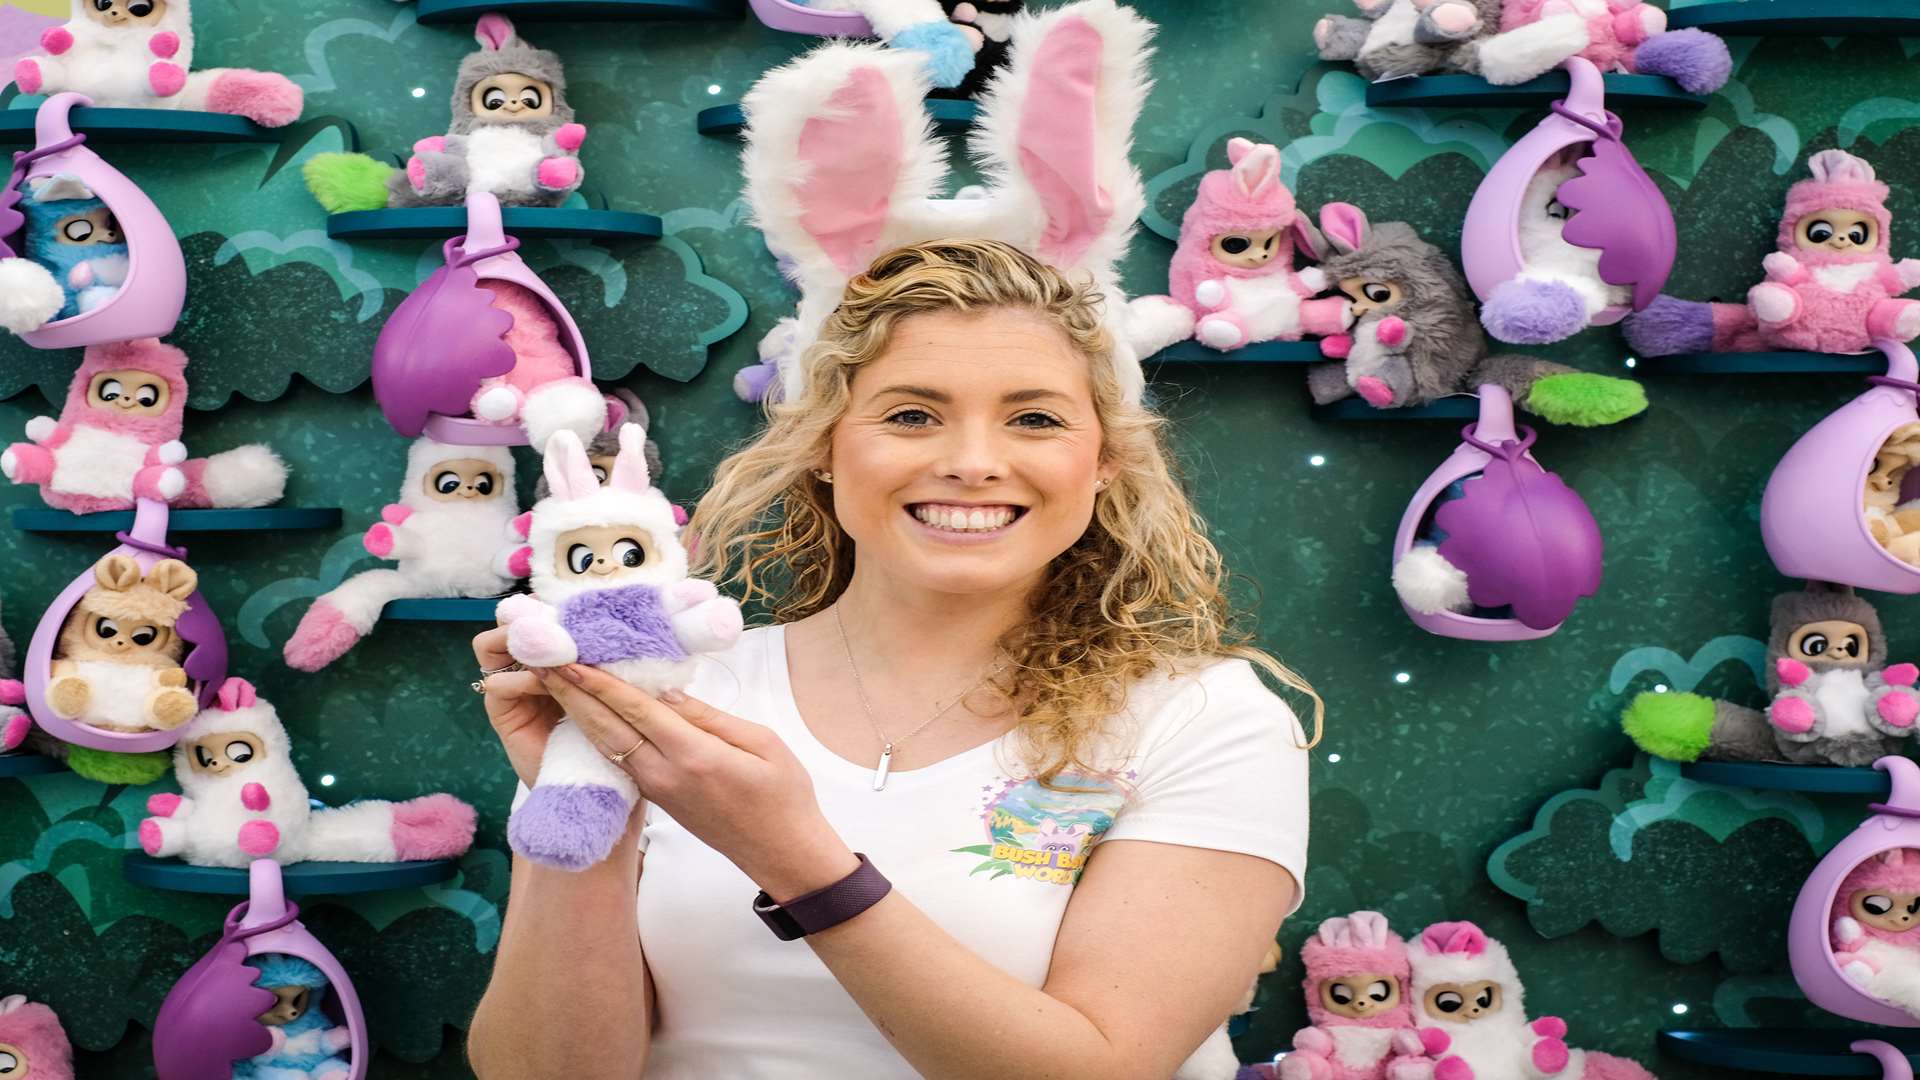 Bush Baby World - a new series of collectable toys, play-sets and accessories were launched at Toy Fair